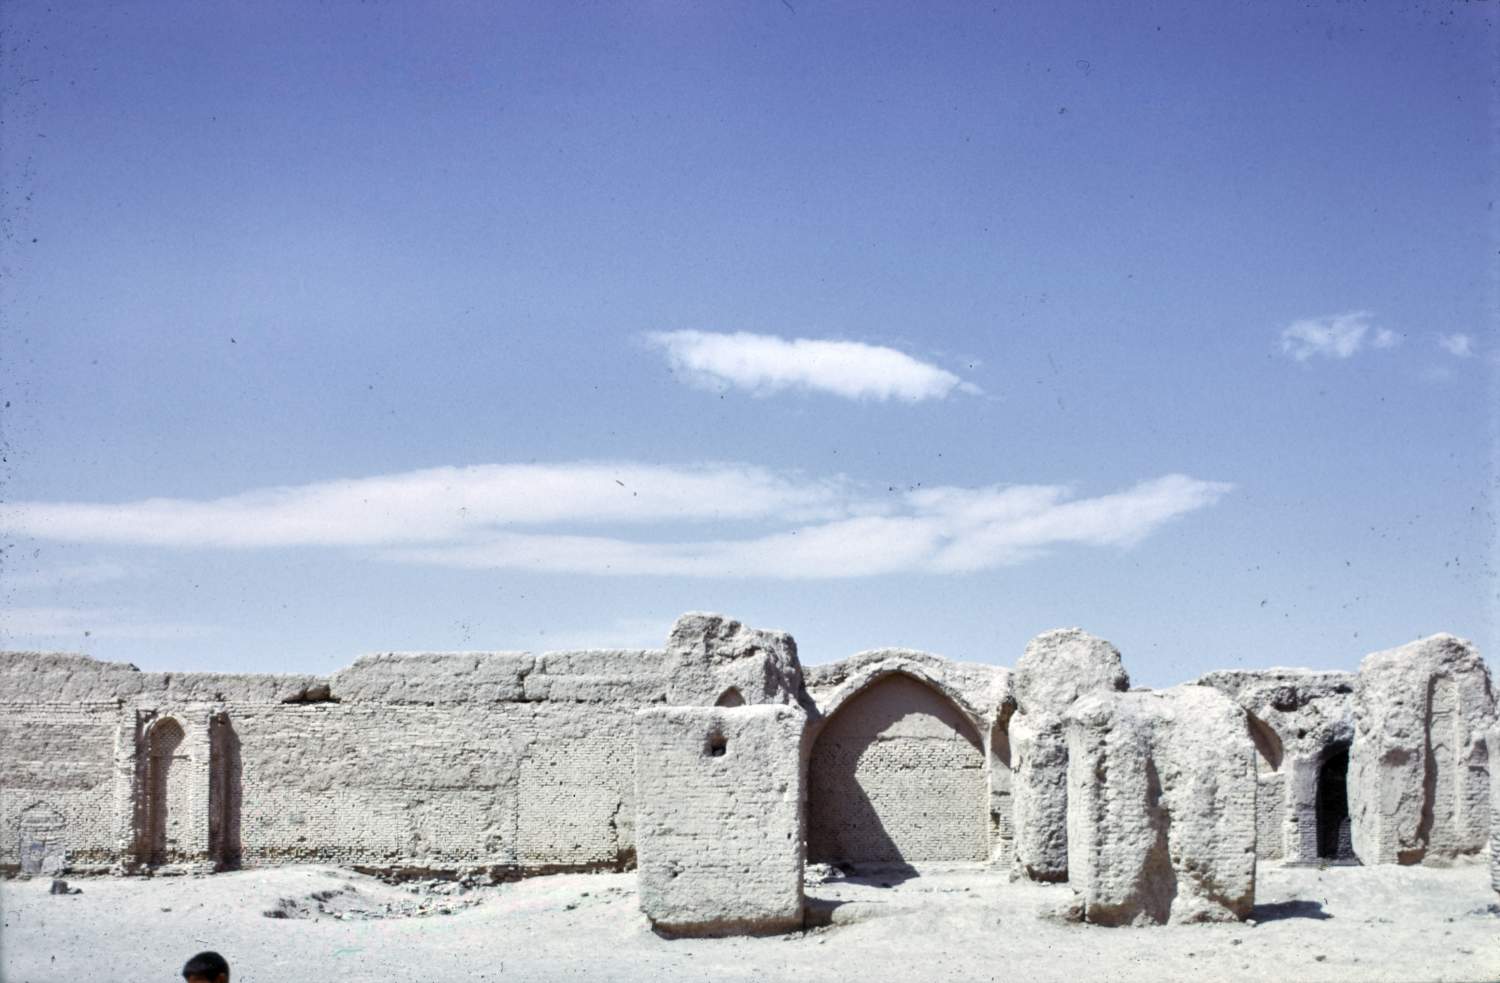 View toward southwestern retaining wall (qibla wall) showing brick masonry of second building phase and remnants of pillars in foreground.